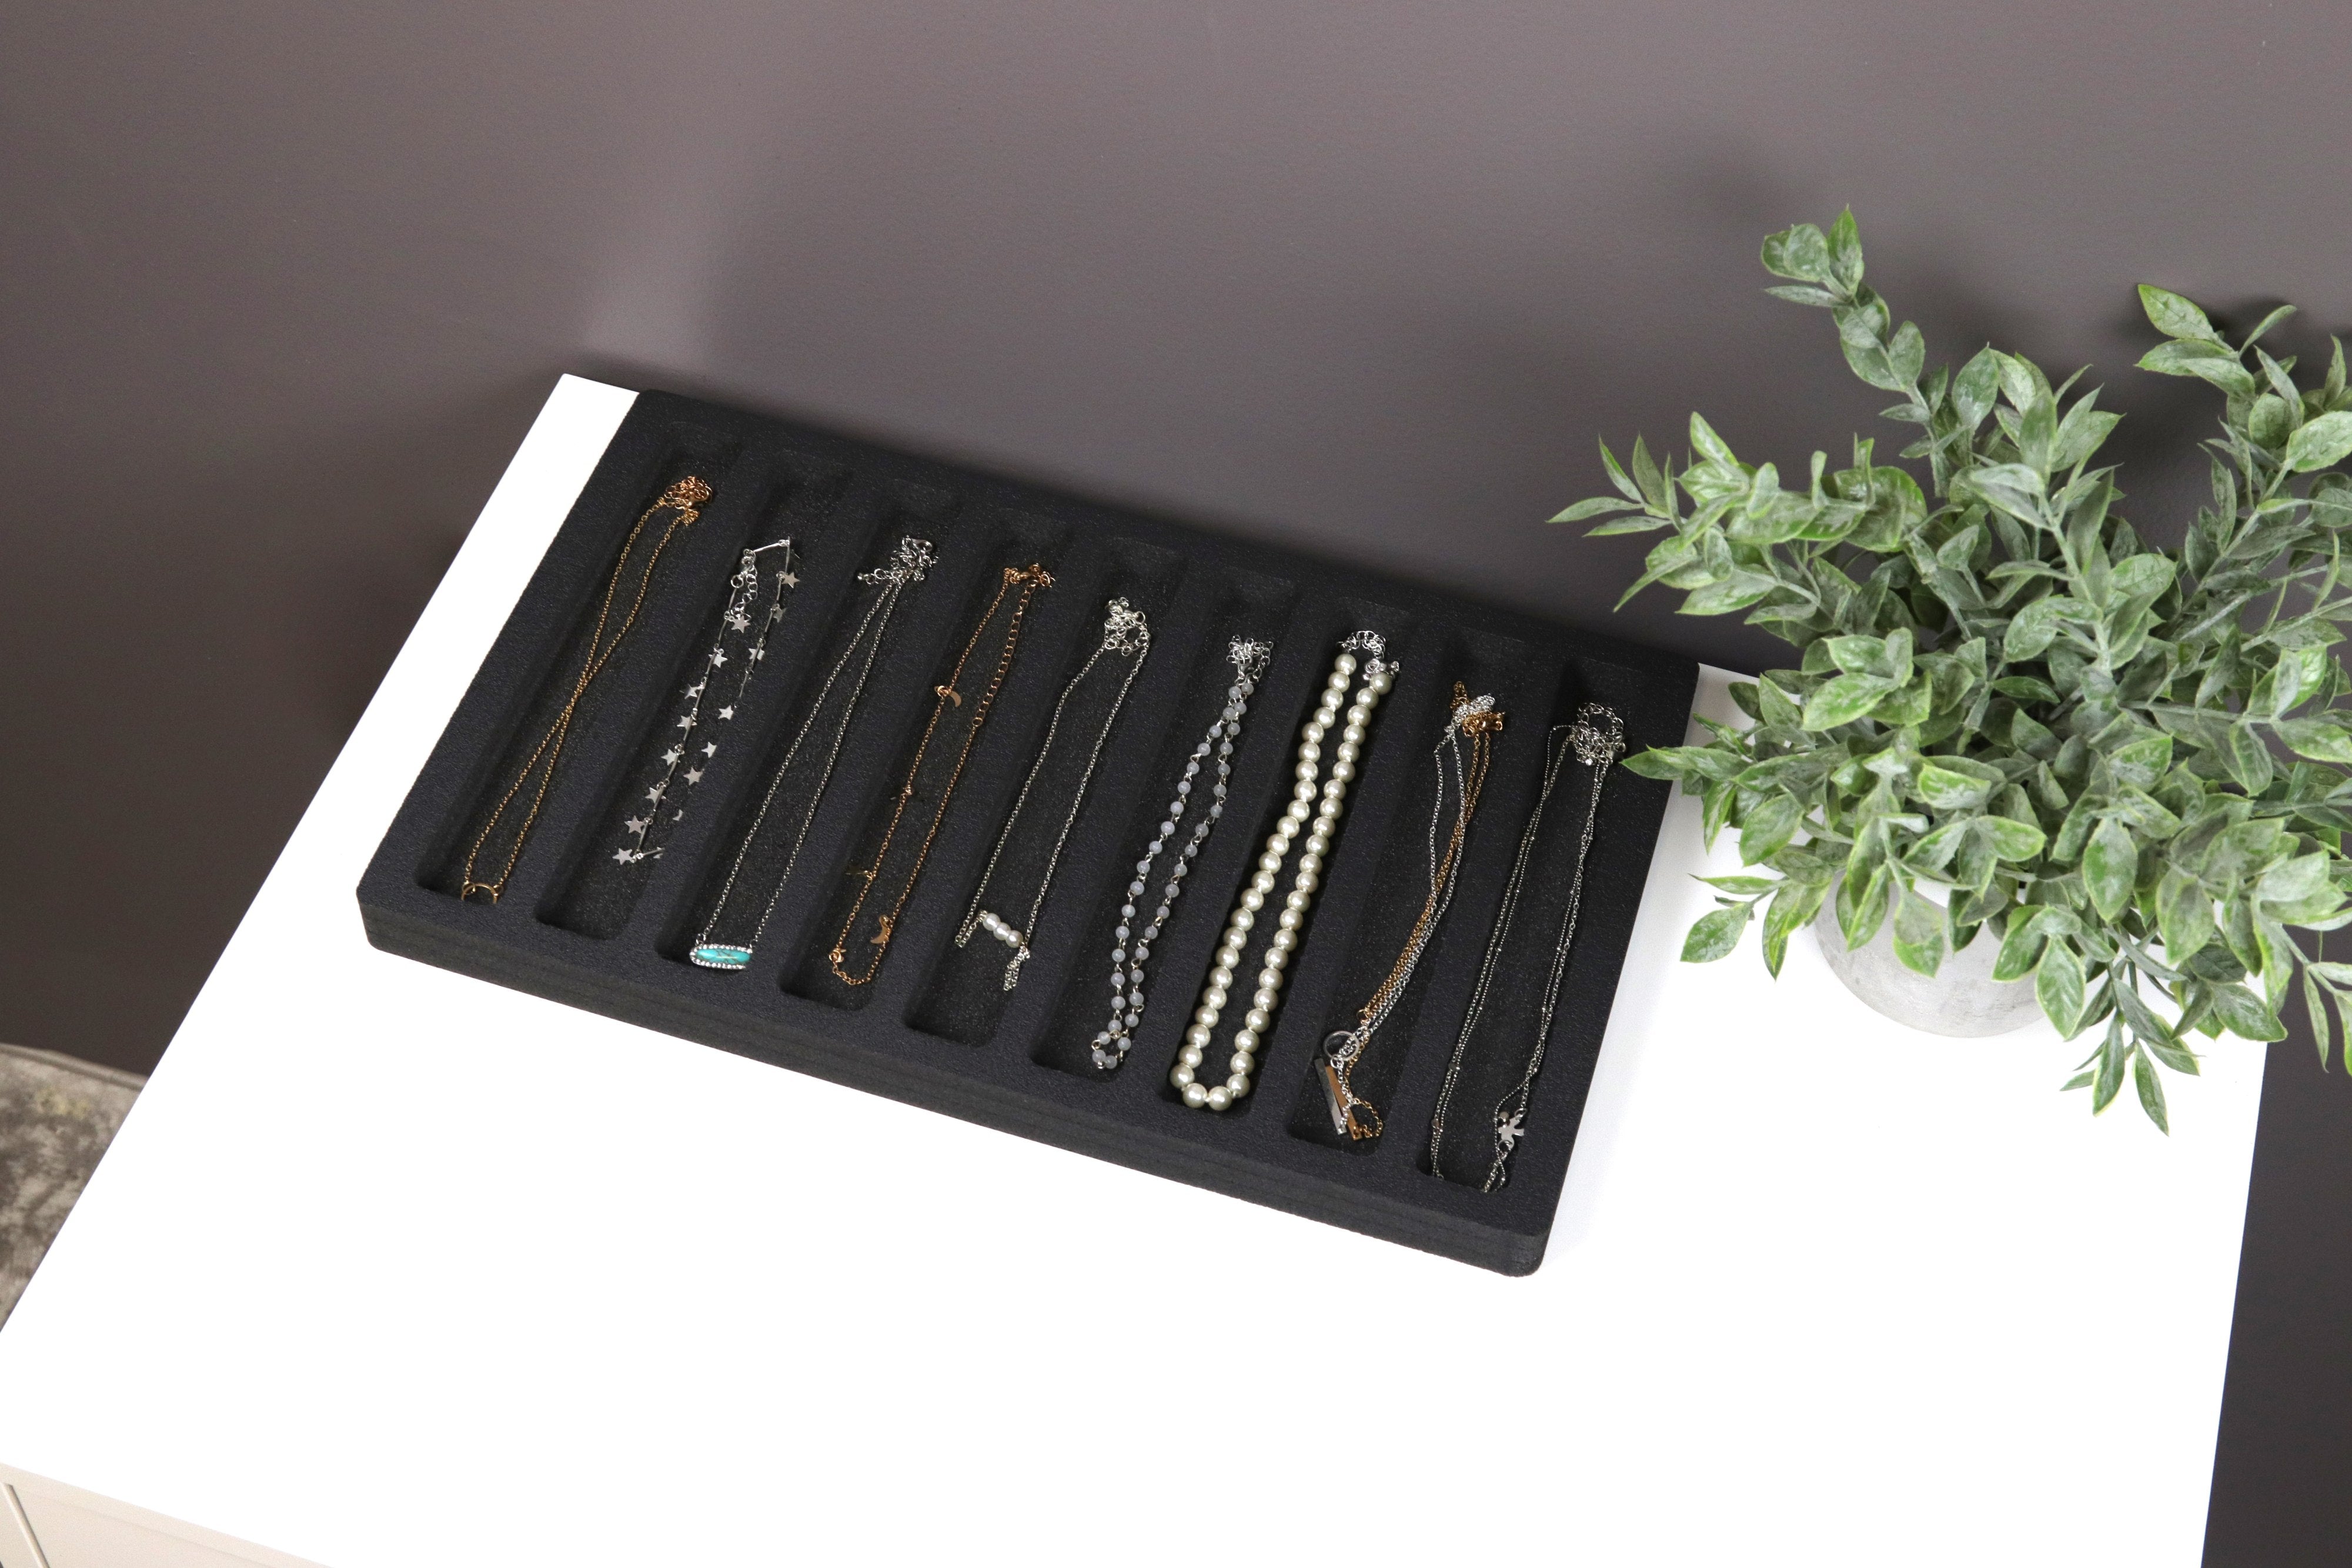 Stackable Jewelry Tray Display Organizer Grid 16x10 Black Foam Necklace More